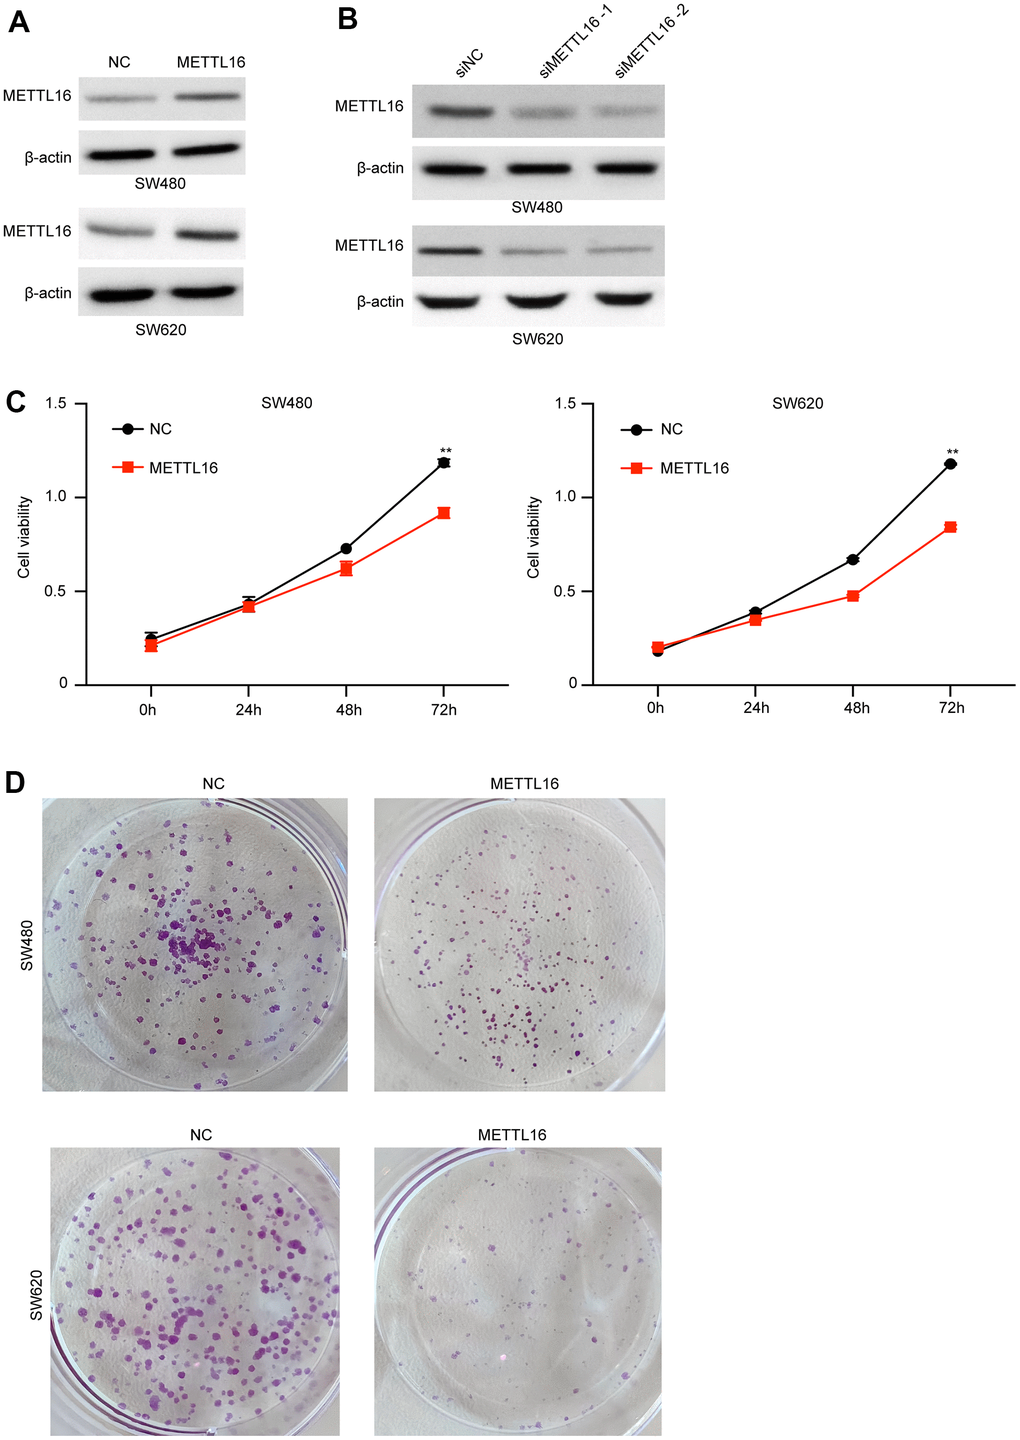 METTL16 regulates the proliferation of CRC cells. (A) SW480 and SW620 cells were transfected with METTL16 overexpression vectors, and protein level of METTL16 was measured by western blotting assay. (B) SW480 and SW620 cells were transfected with METTL16 siRNAs, then protein level of METTL16 was measured by western blotting assay. (C) Cell viability of SW480 and SW620 cells under overexpression of METTL16 was measured by CCK-8 assay. (D) Proliferation of SW480 and SW620 cells under overexpression of METTL16 was detected by using colony formation assay. **p